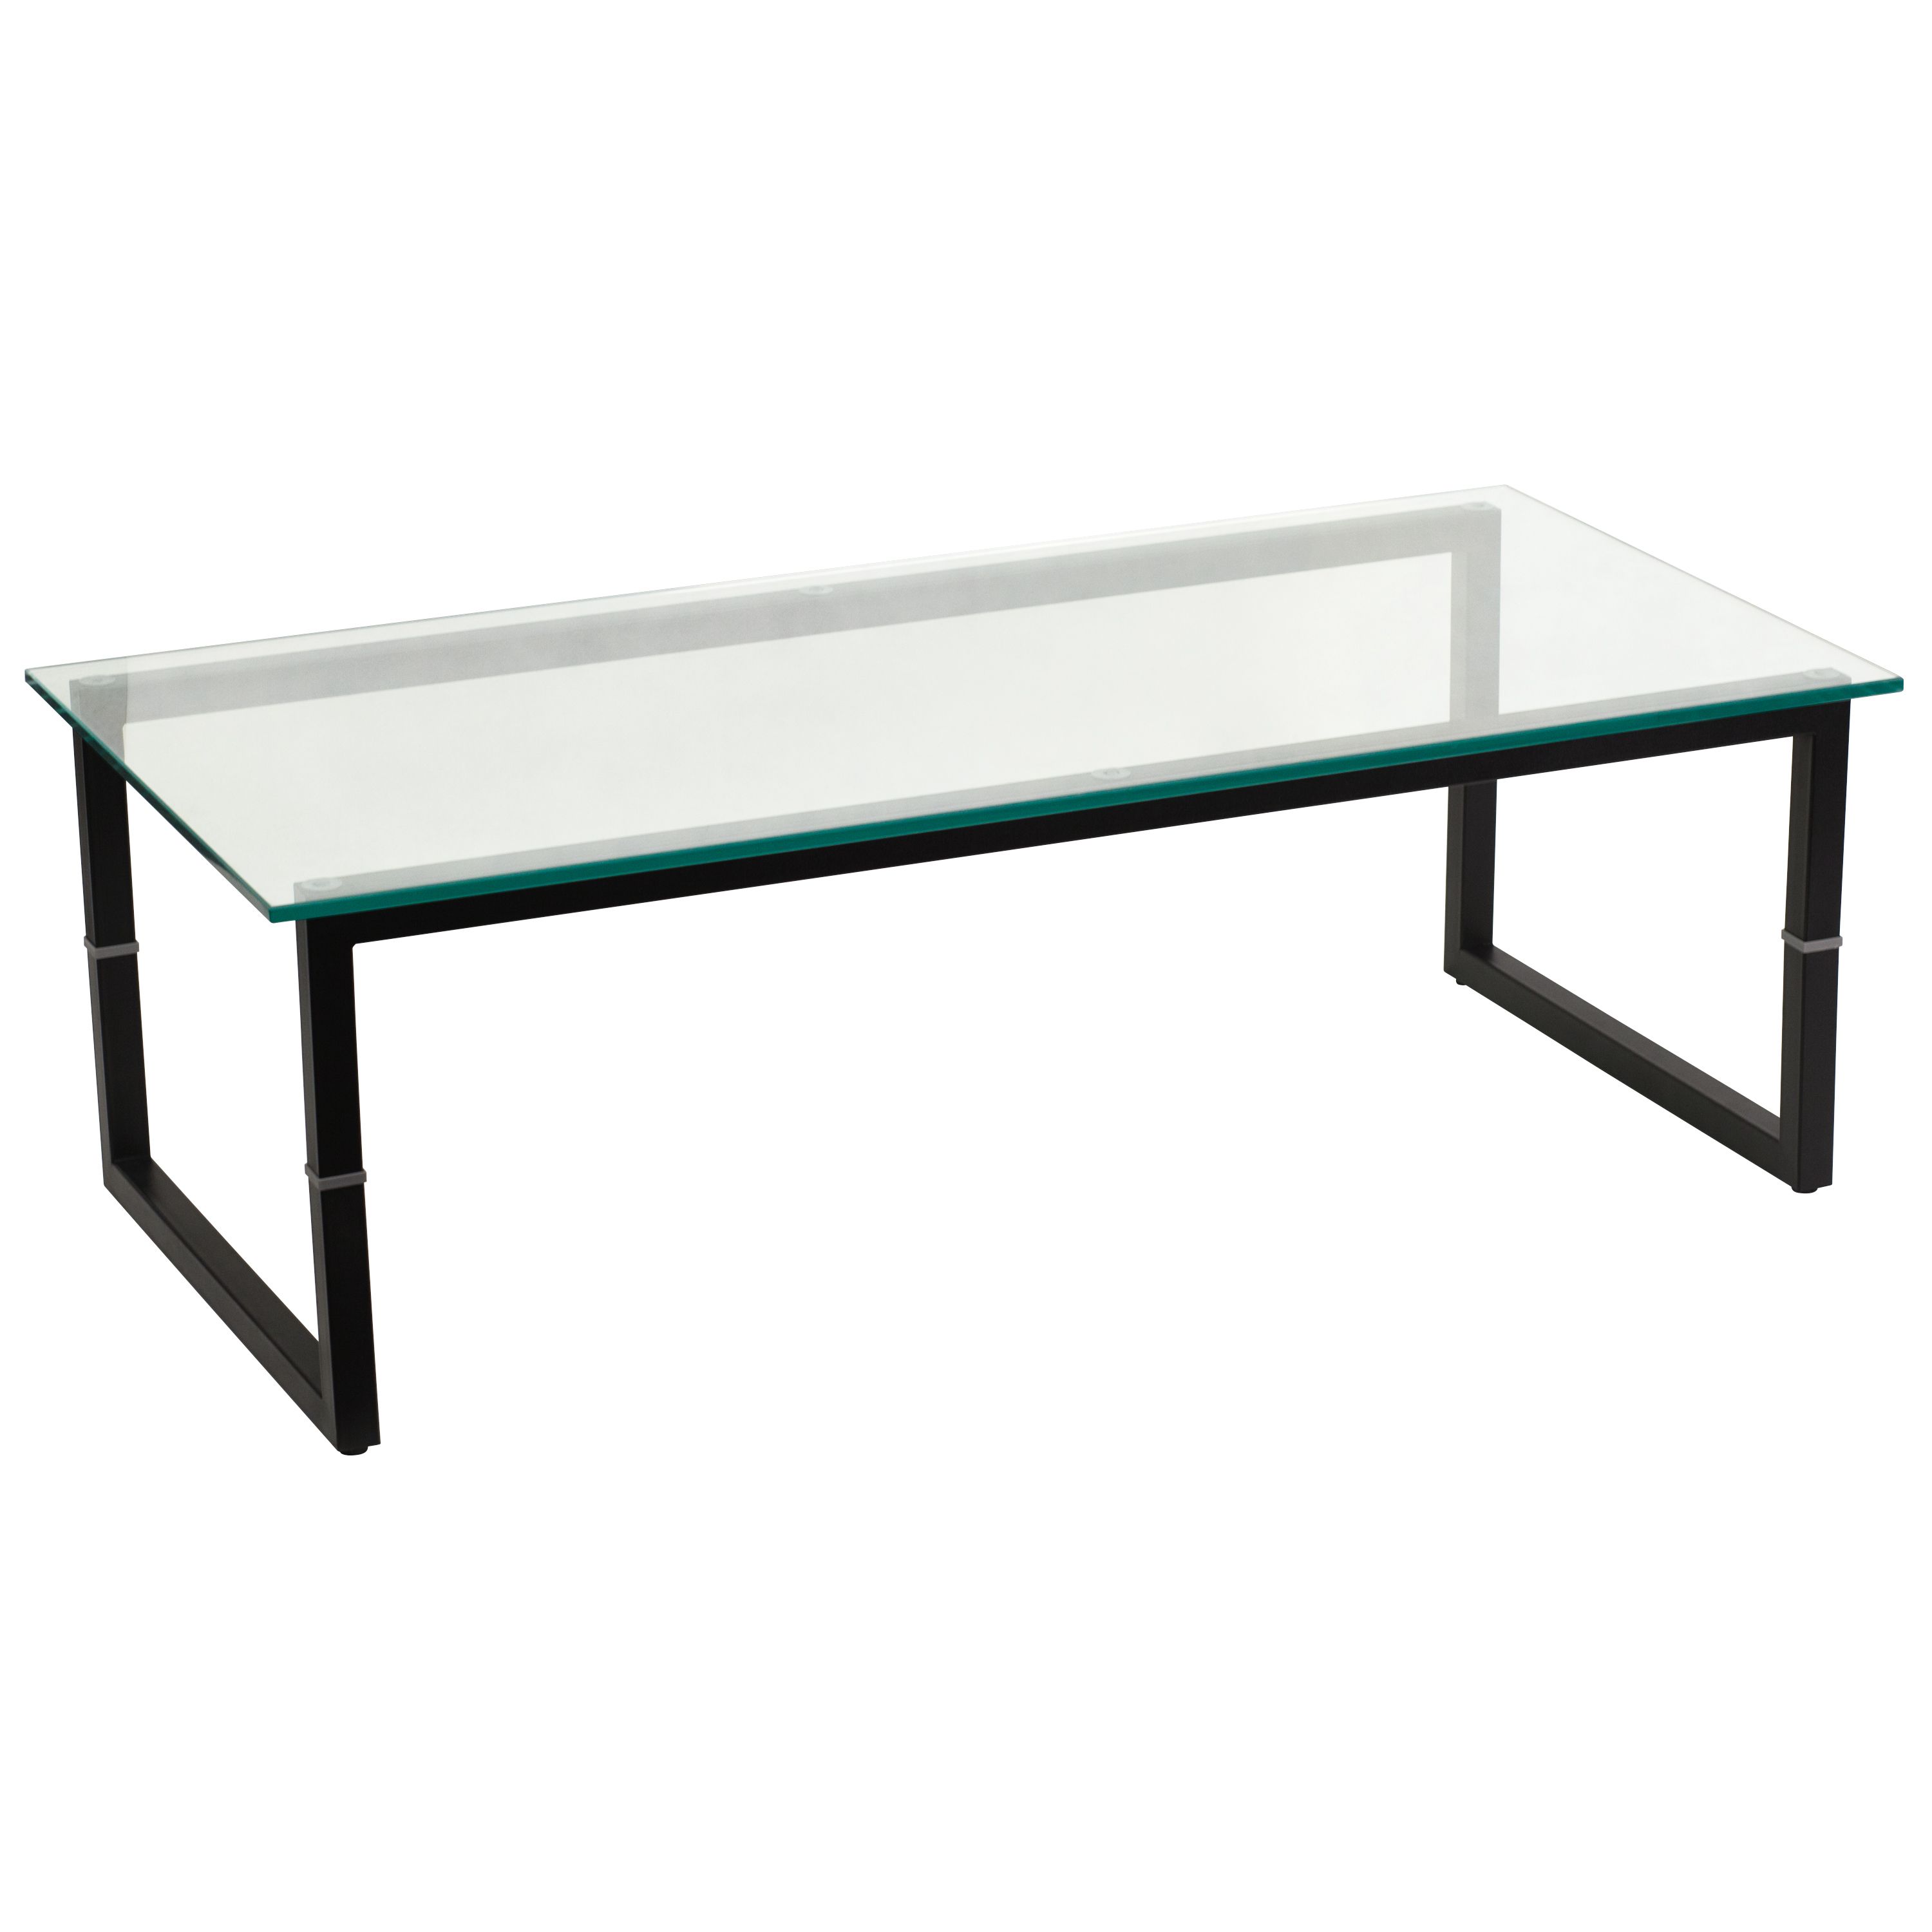 Glass Table Coffee Contemporary Glass Coffee Tables With Minimalist Design Rustic You Could Sit Down And Relax On The Sofa With Your Cup Of Nescafe At This Table (View 2 of 10)